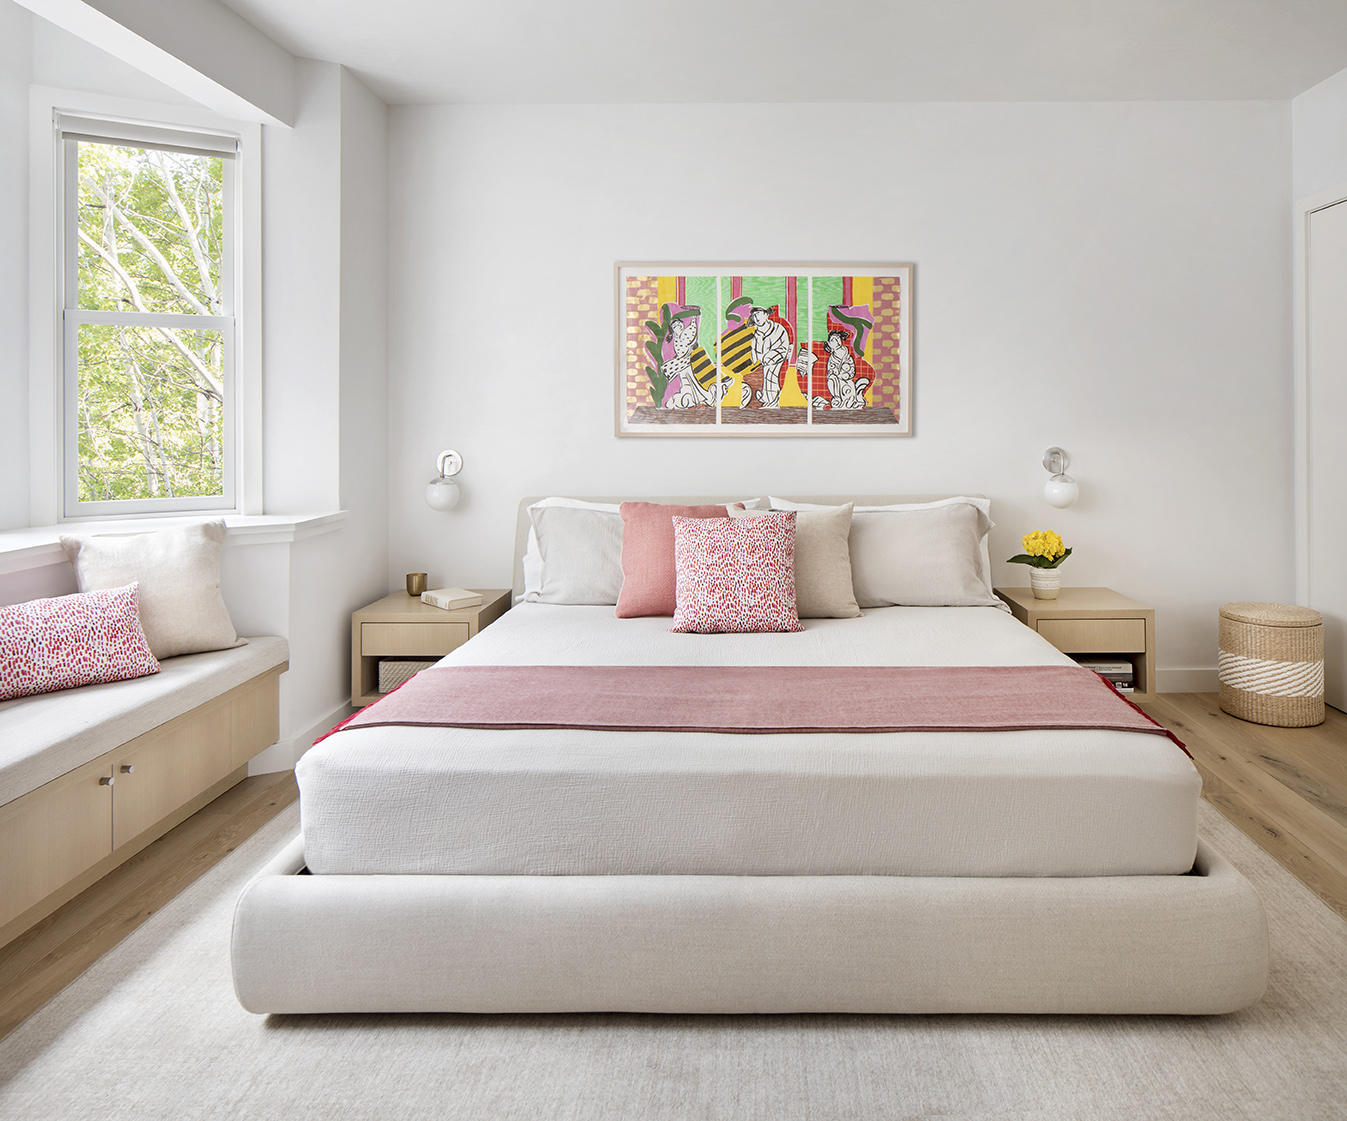 pink Scandinavian bedroom ideas that will inspire you for a remodel